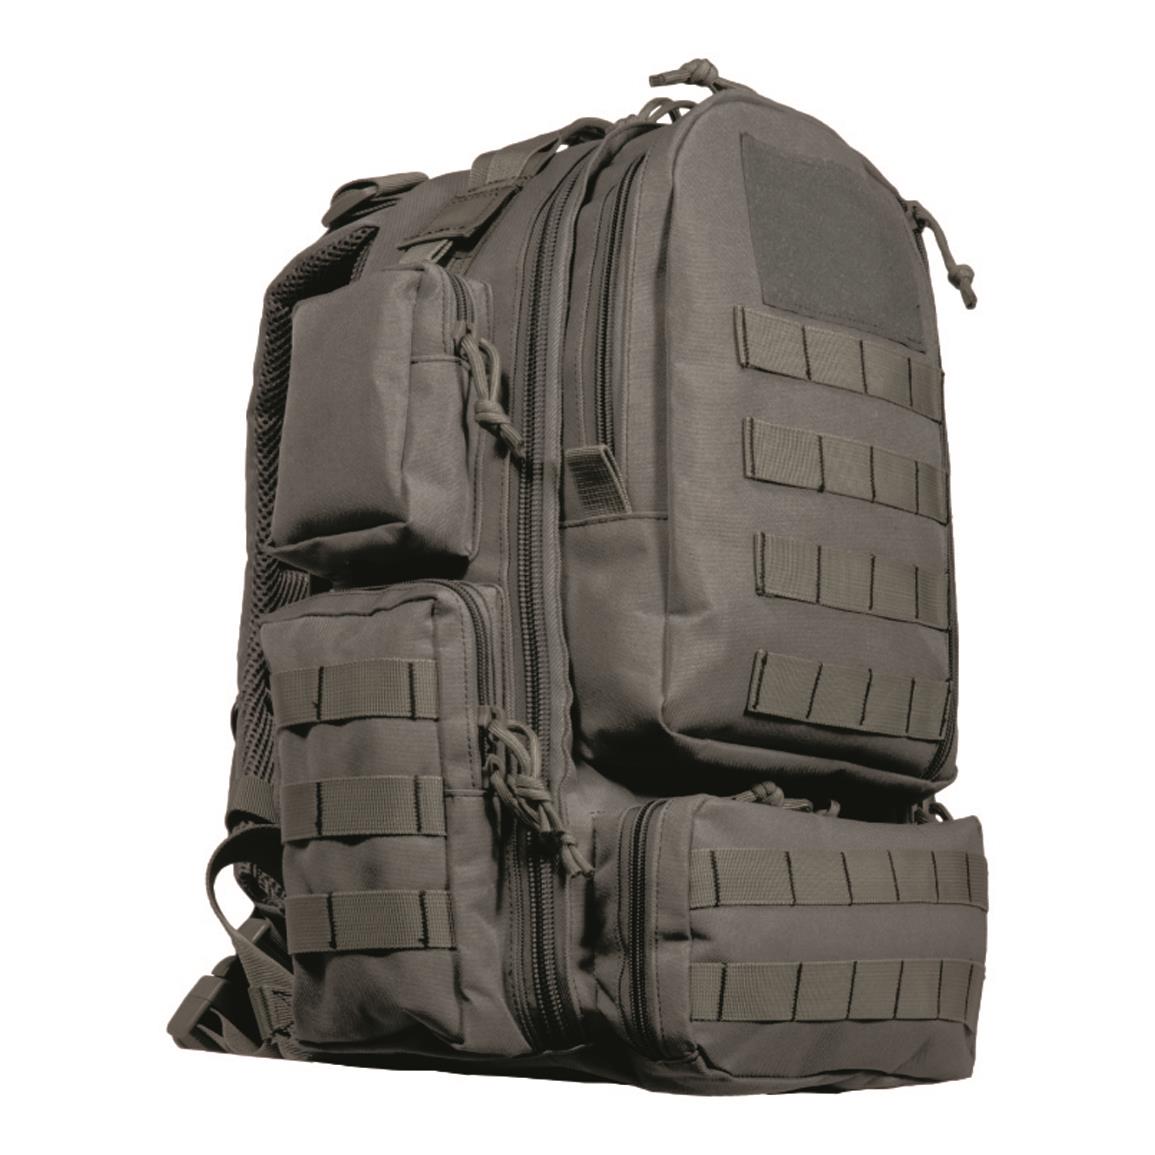 Armor Express QRF Ruck Armor Carrier Backpack, Gray